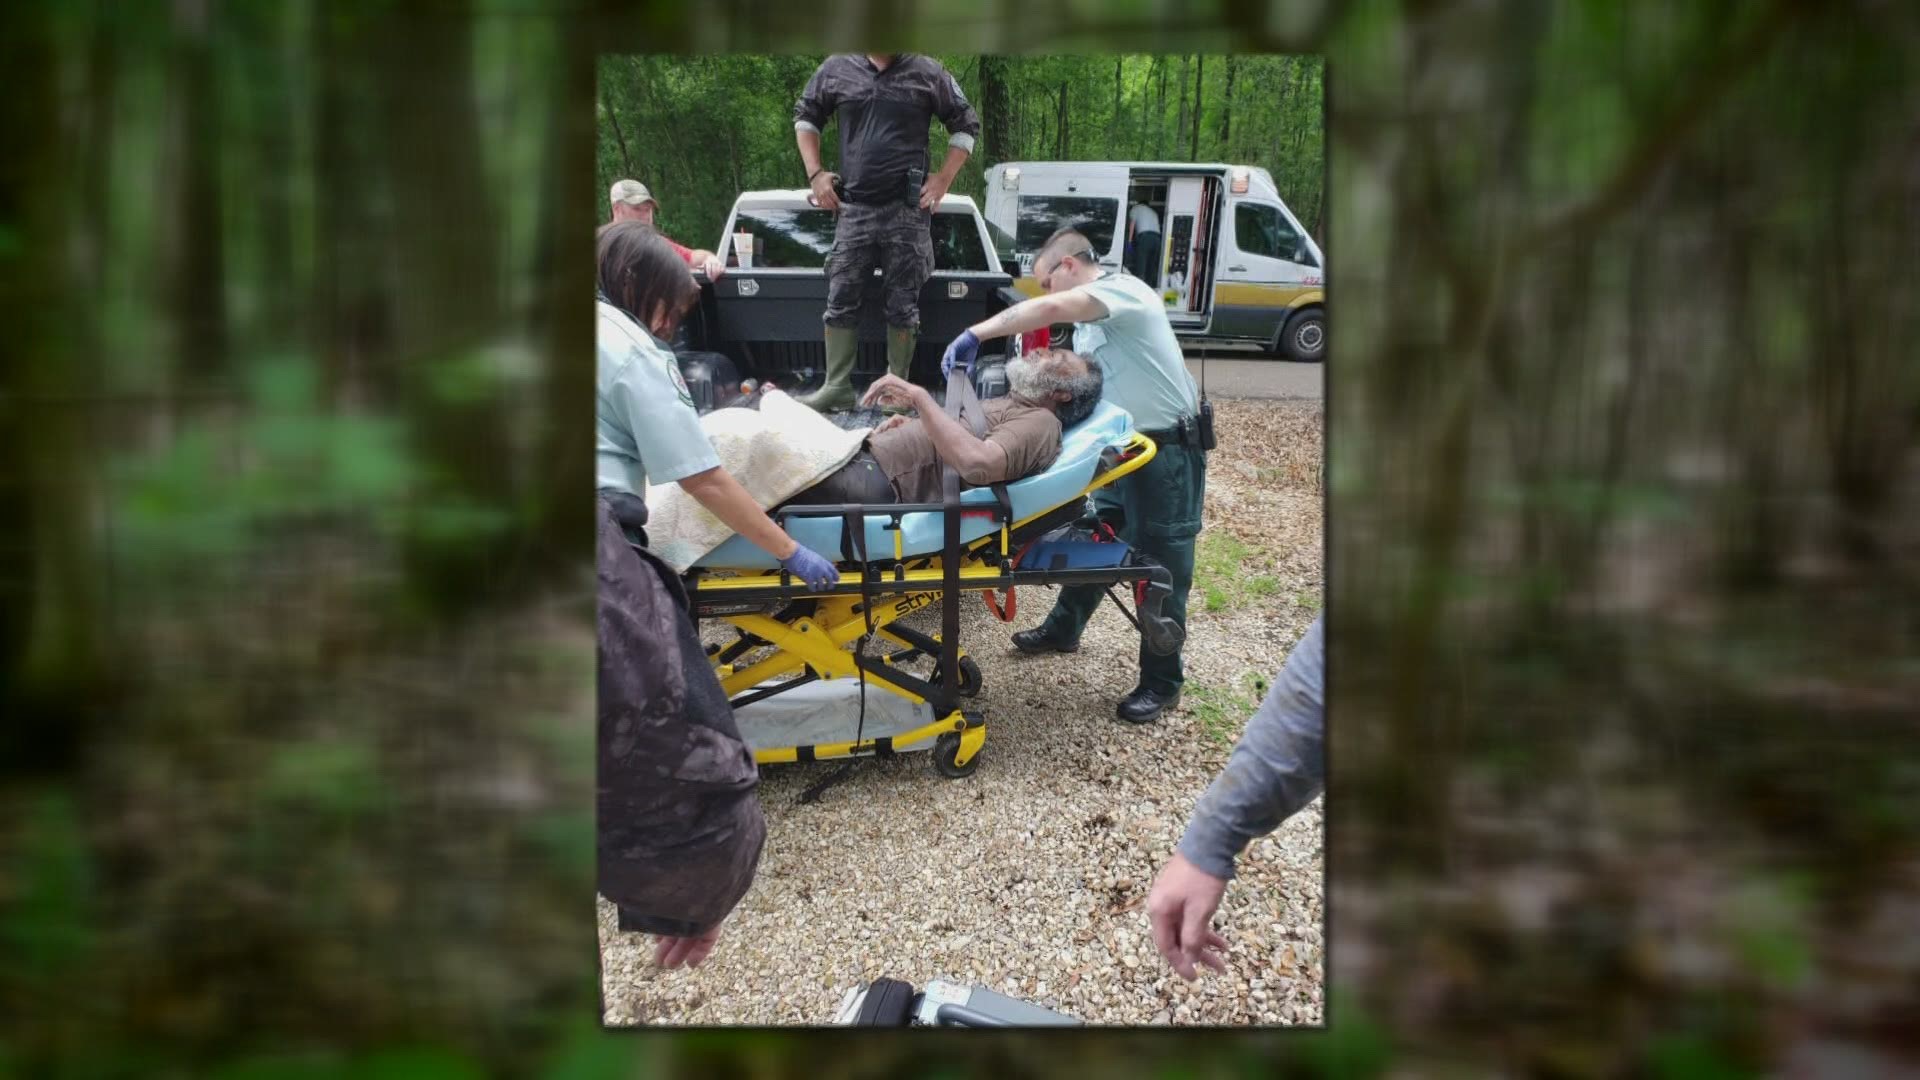 A man who suffers from dementia was found dehydrated and with hypothermia but alive after nearly 5 days in the woods near his home.